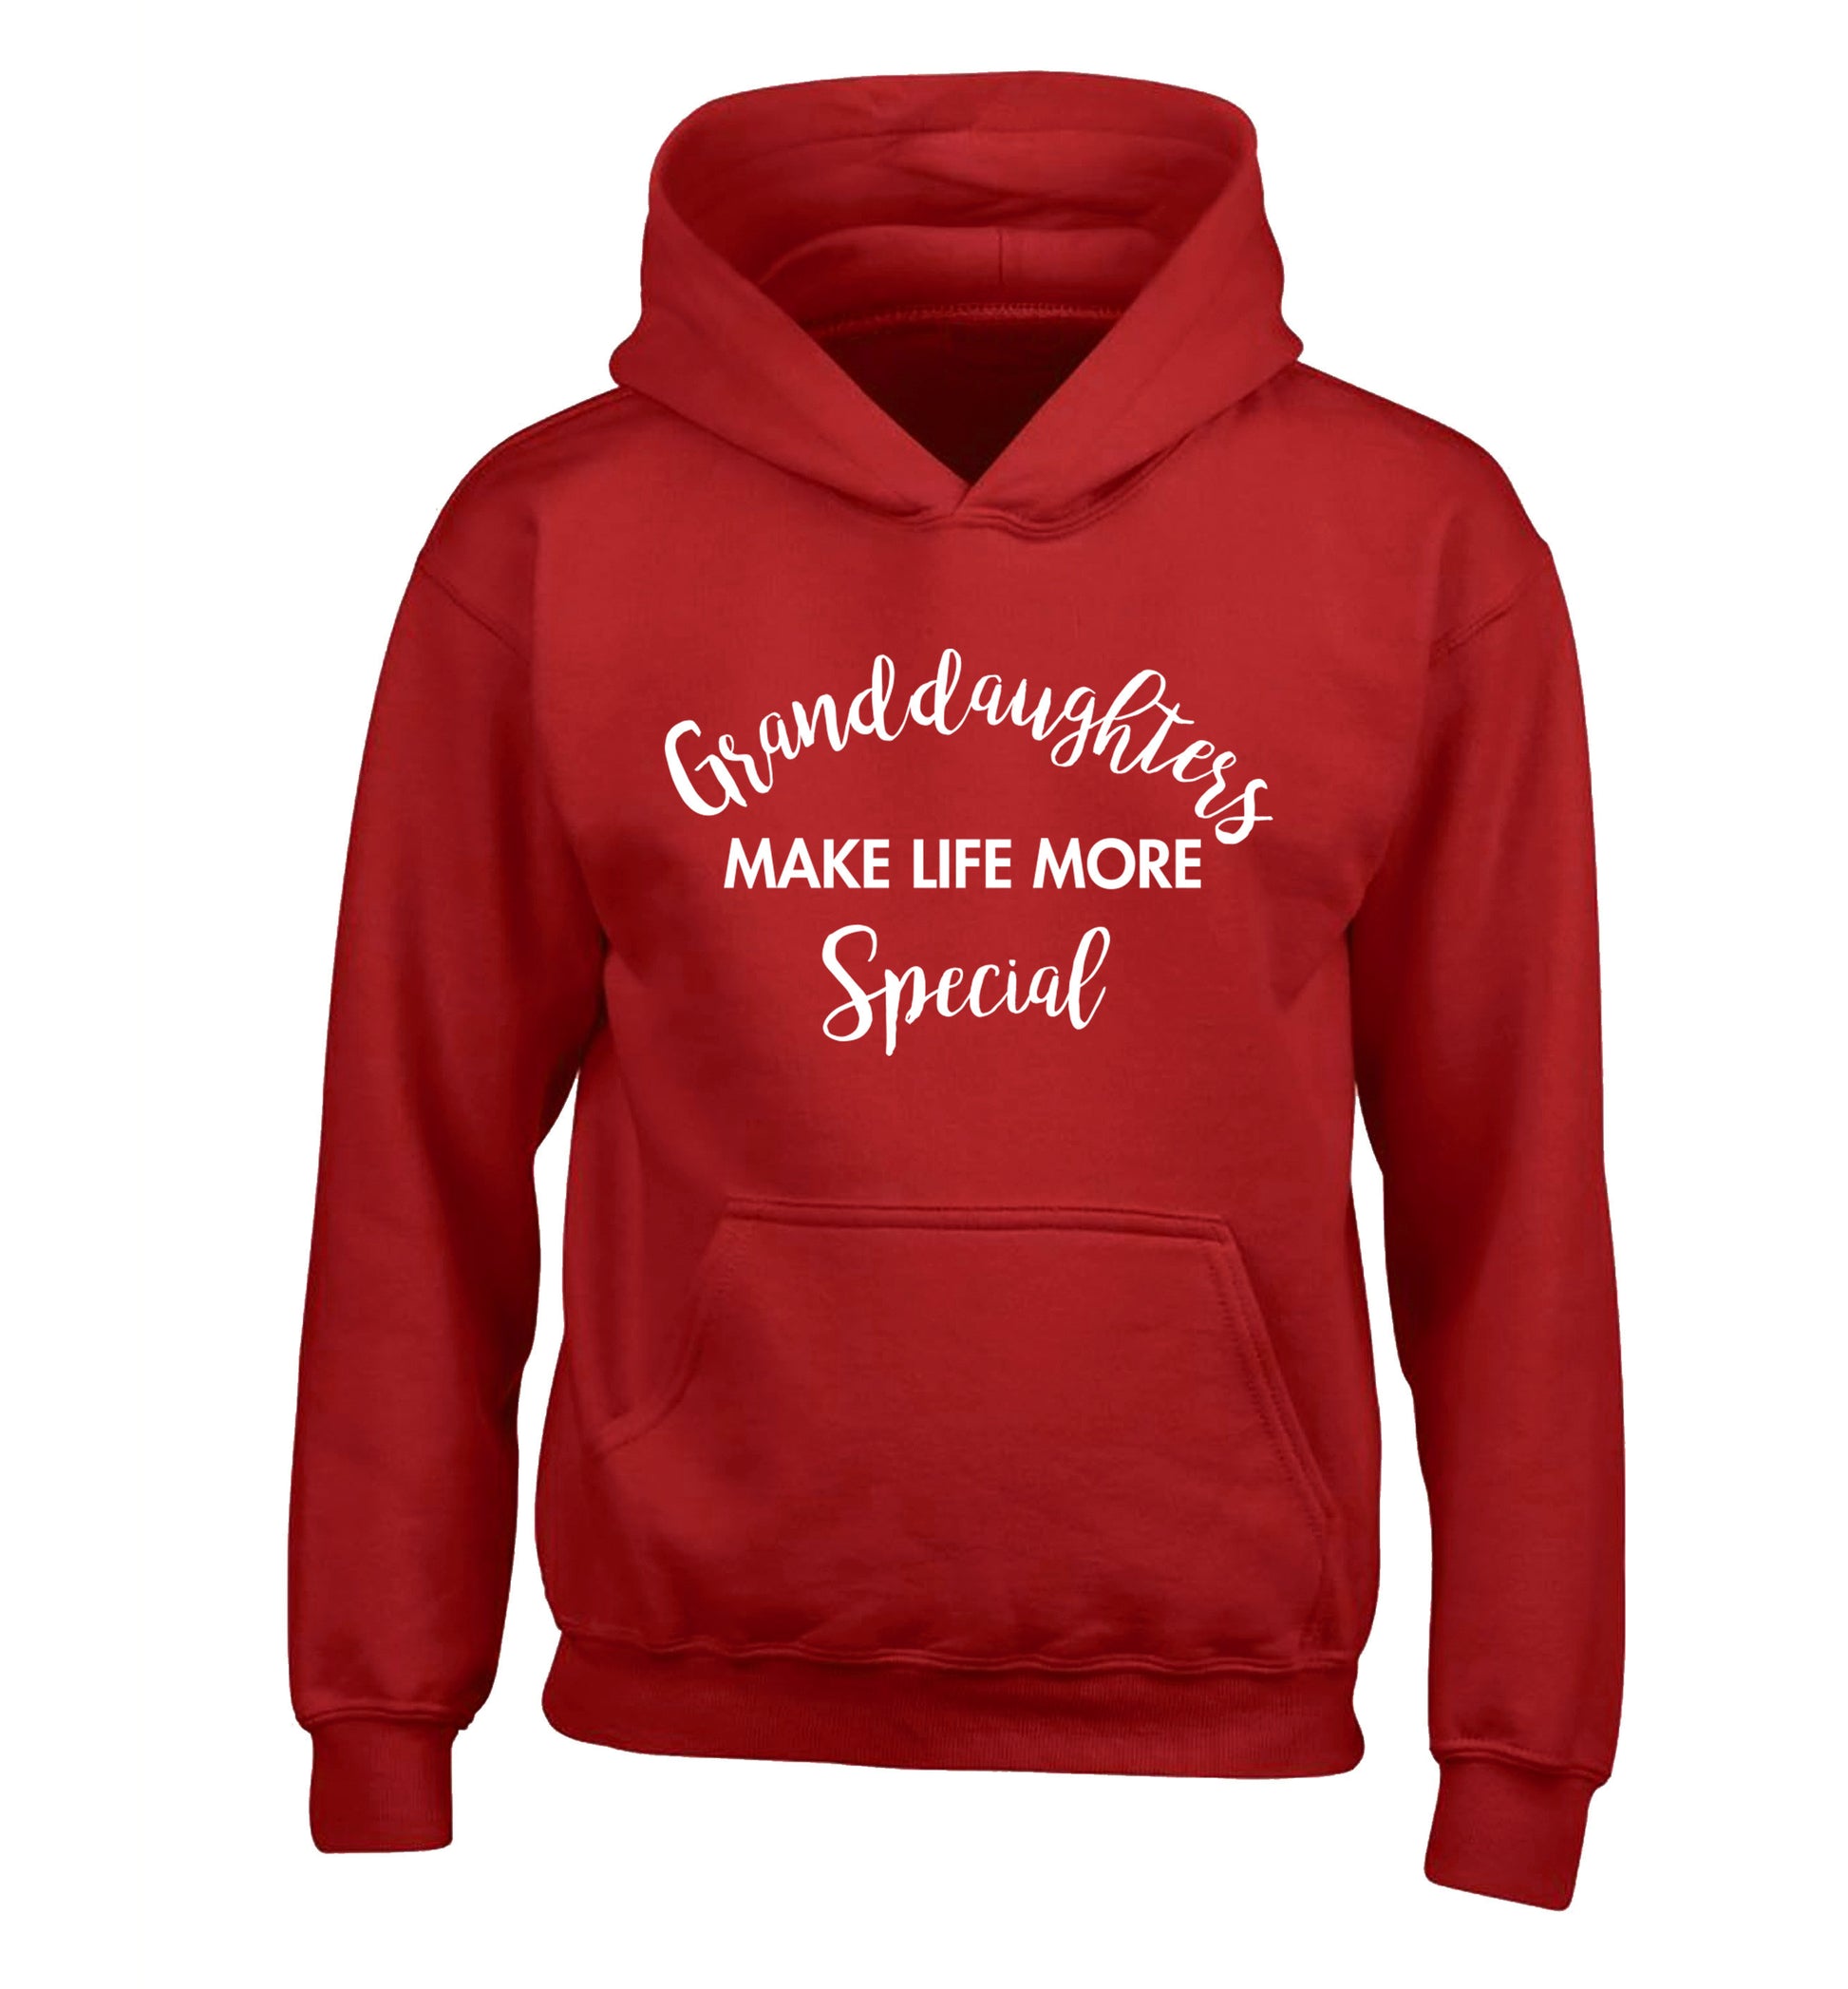 Granddaughters make life more special children's red hoodie 12-14 Years